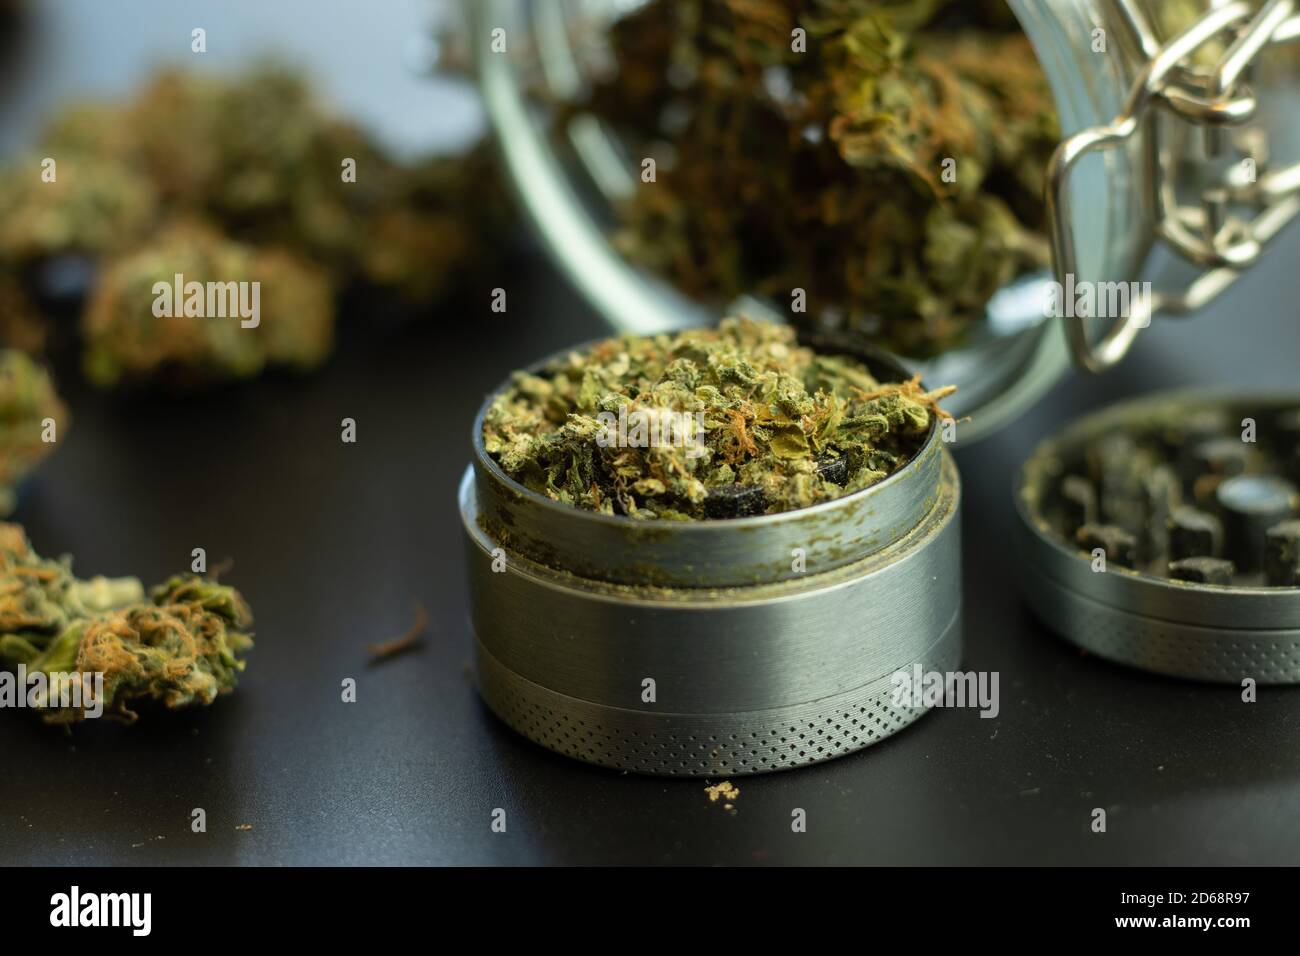 Grinder with marijuana close up. Cannabis use in healthcare